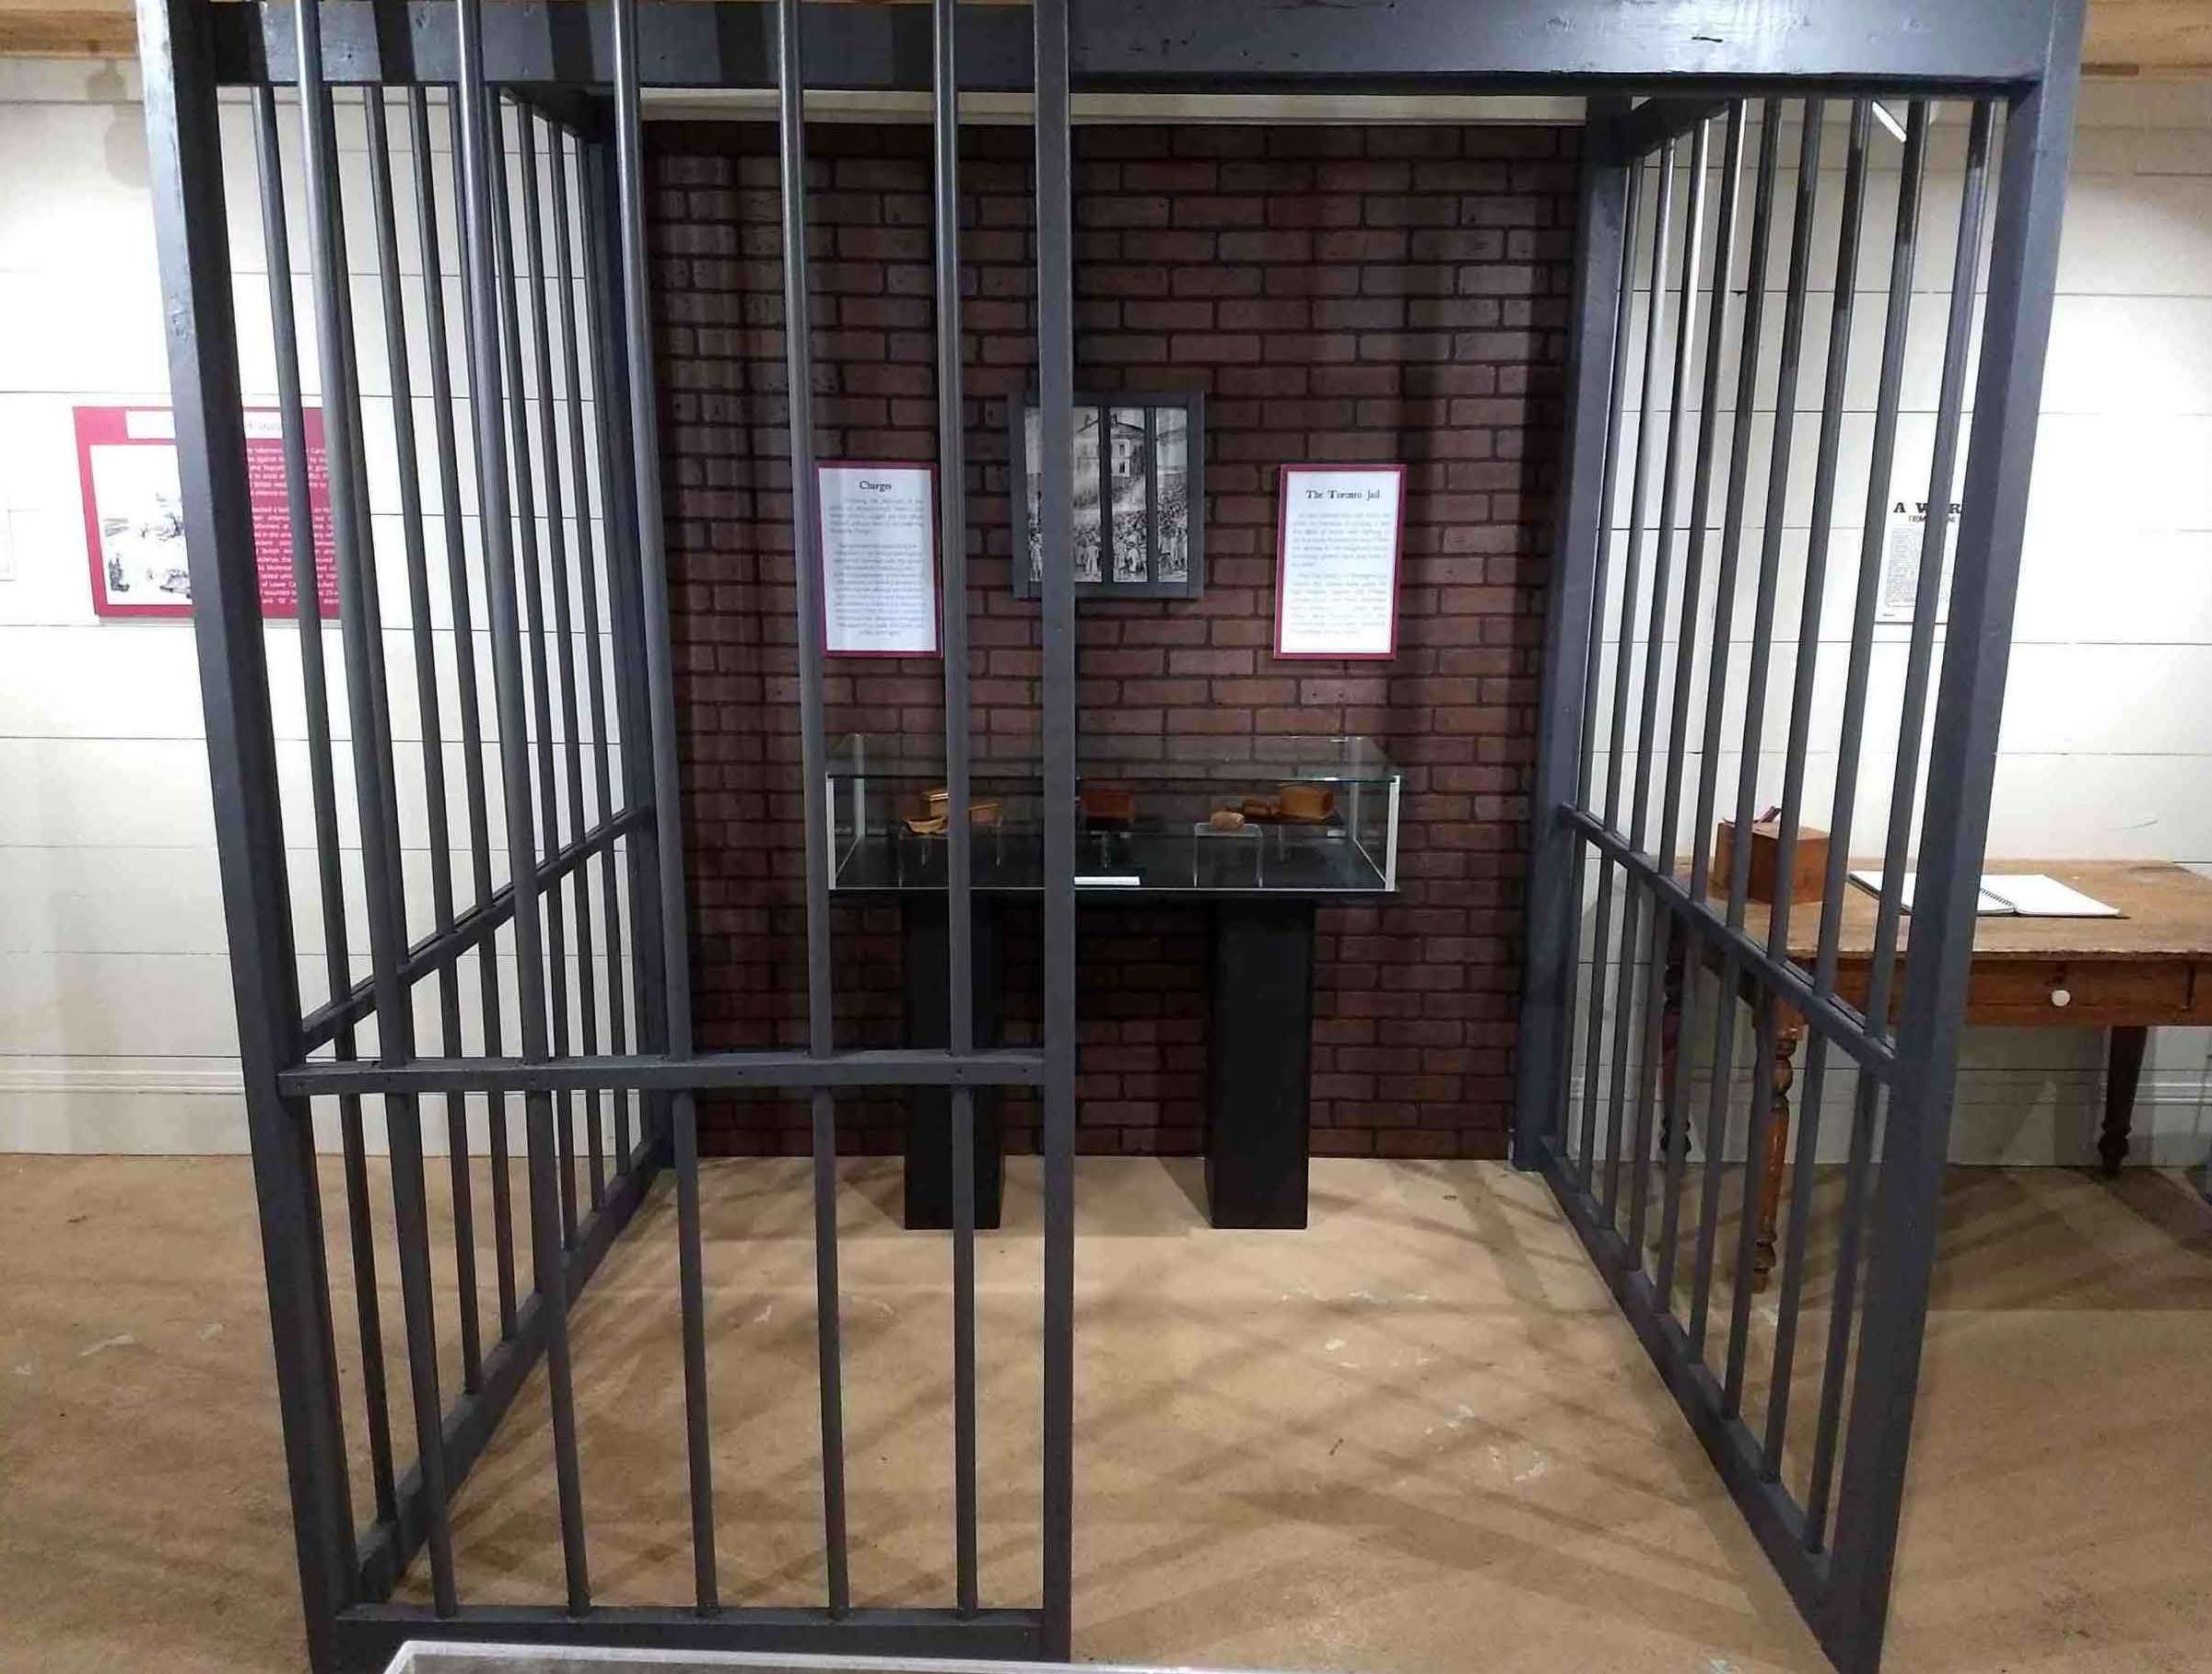 A replica jailcell in the exhibit space of the Sharon Temple. Guests are able to step inside and view the collection of rebellion boxes.